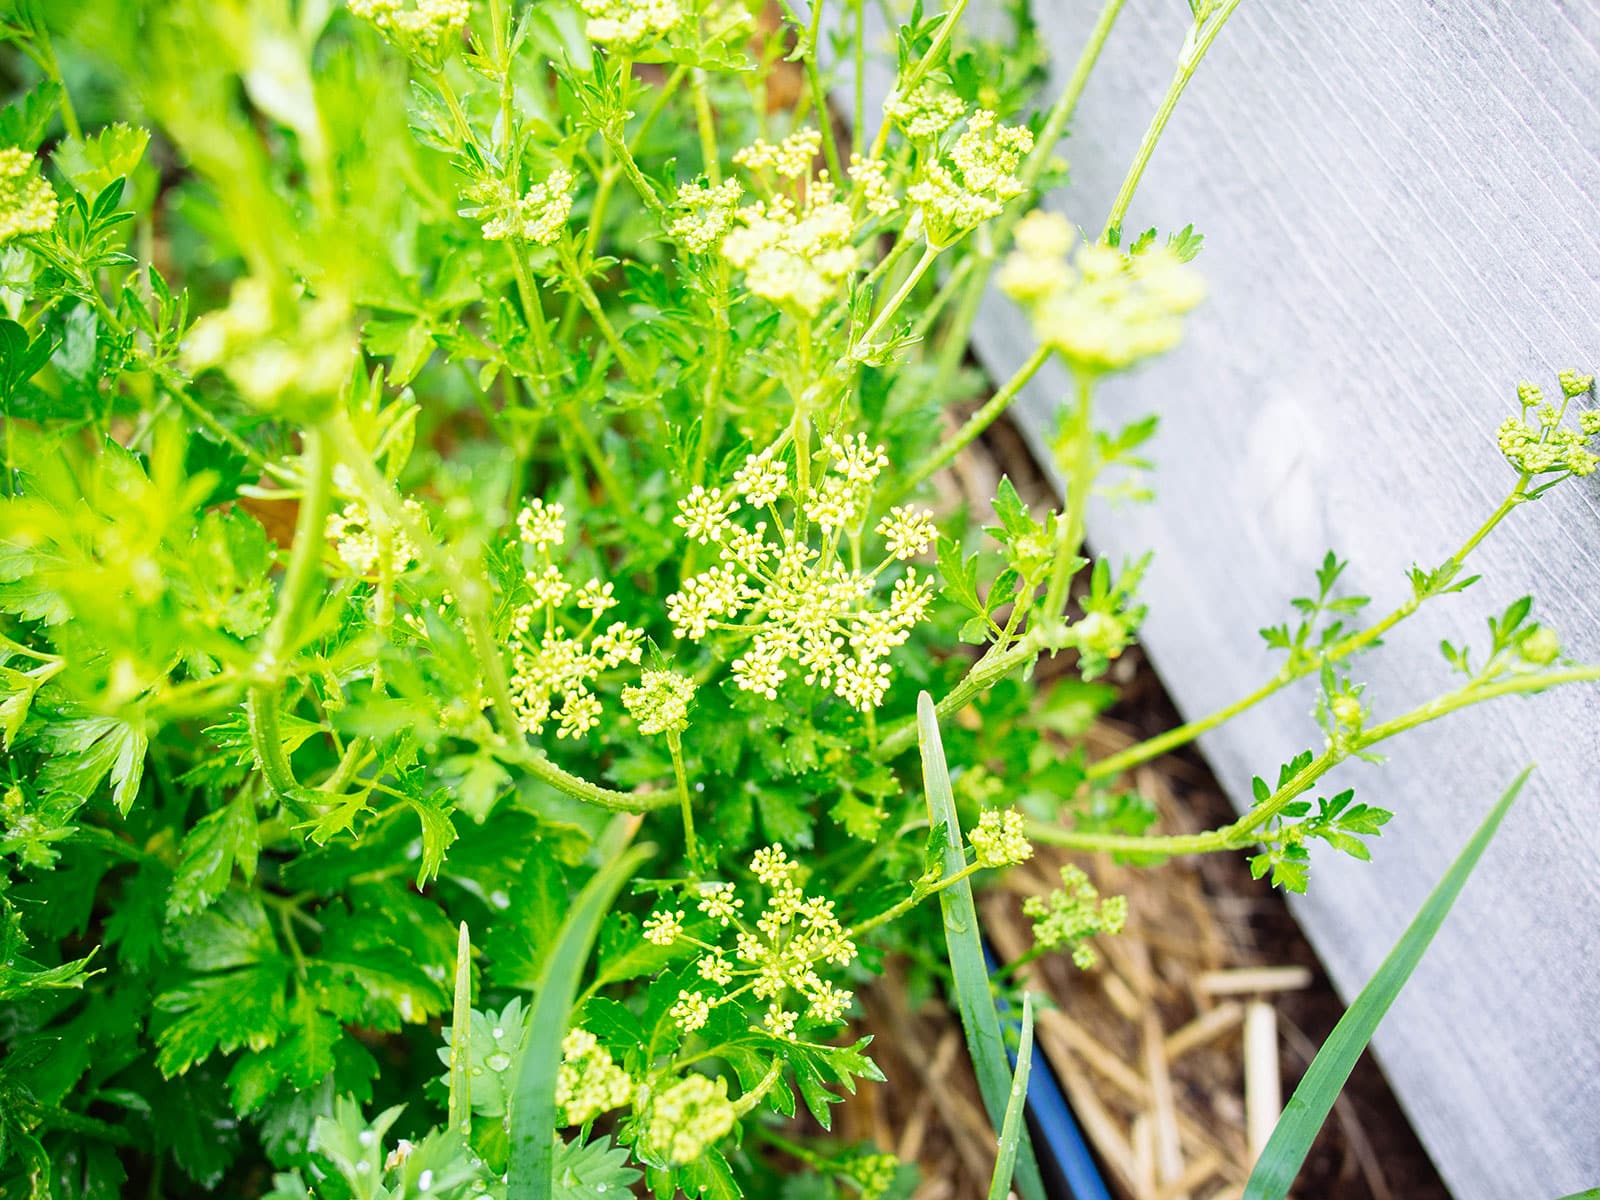 Clusters of flowers on bolted cilantro plants